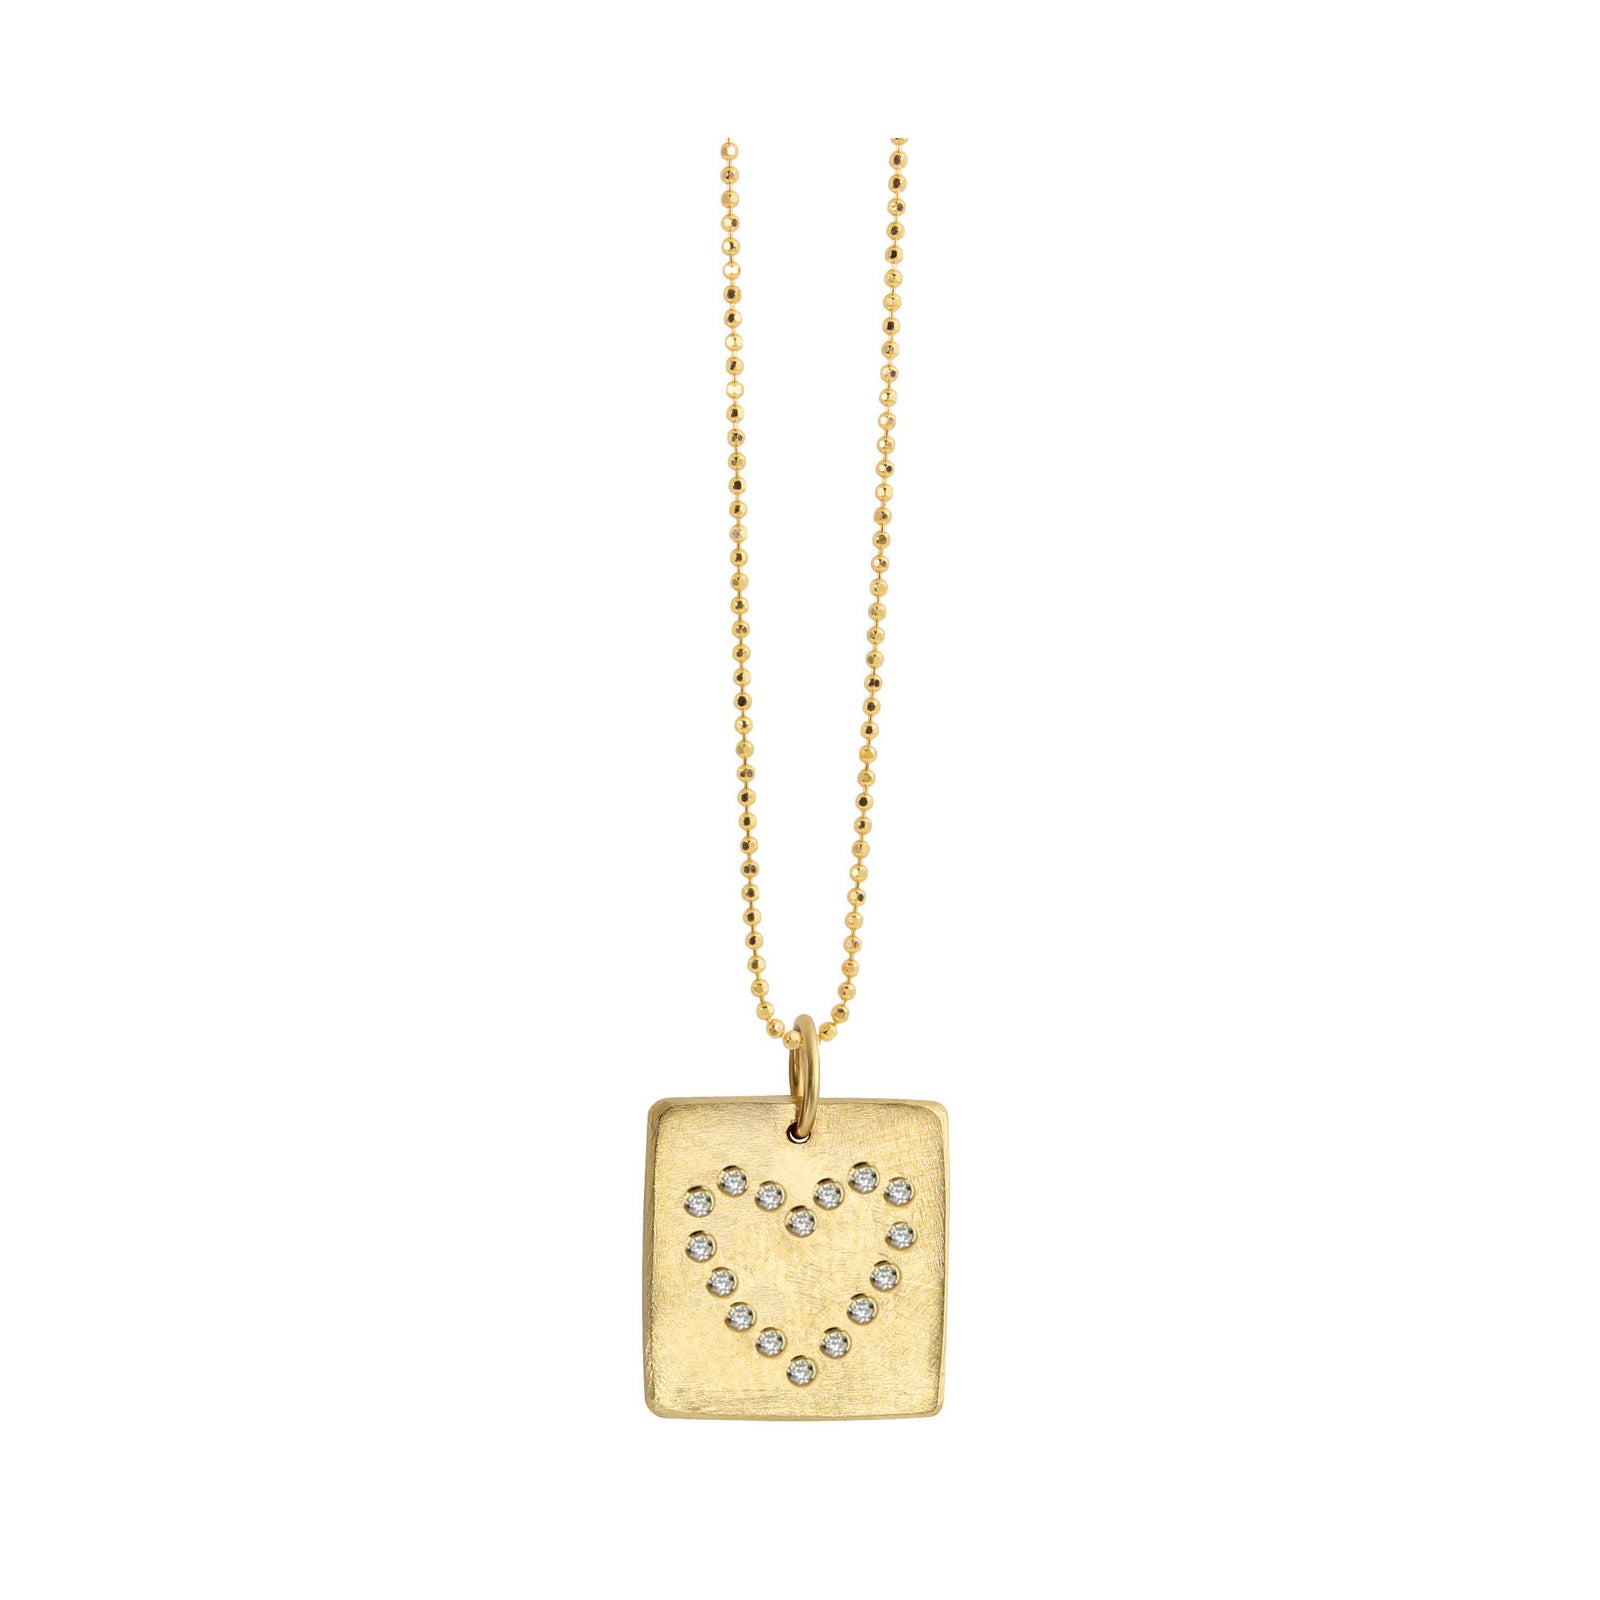 14k yellow gold LEAH square charm with diamond heart outline